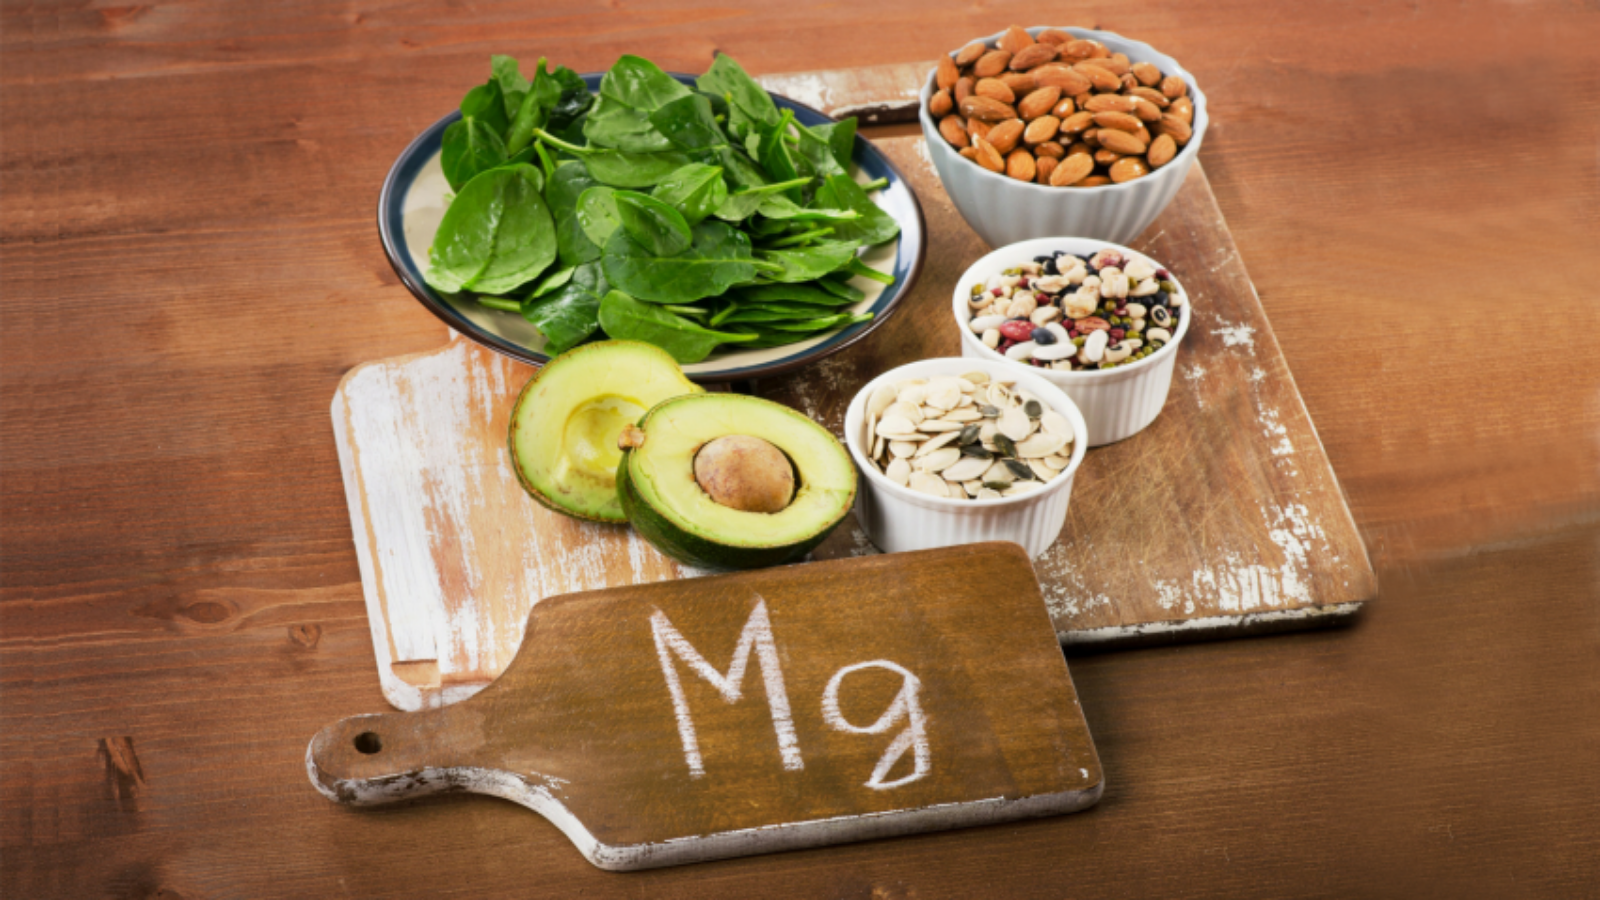 Foods displayed are rich in magnesium